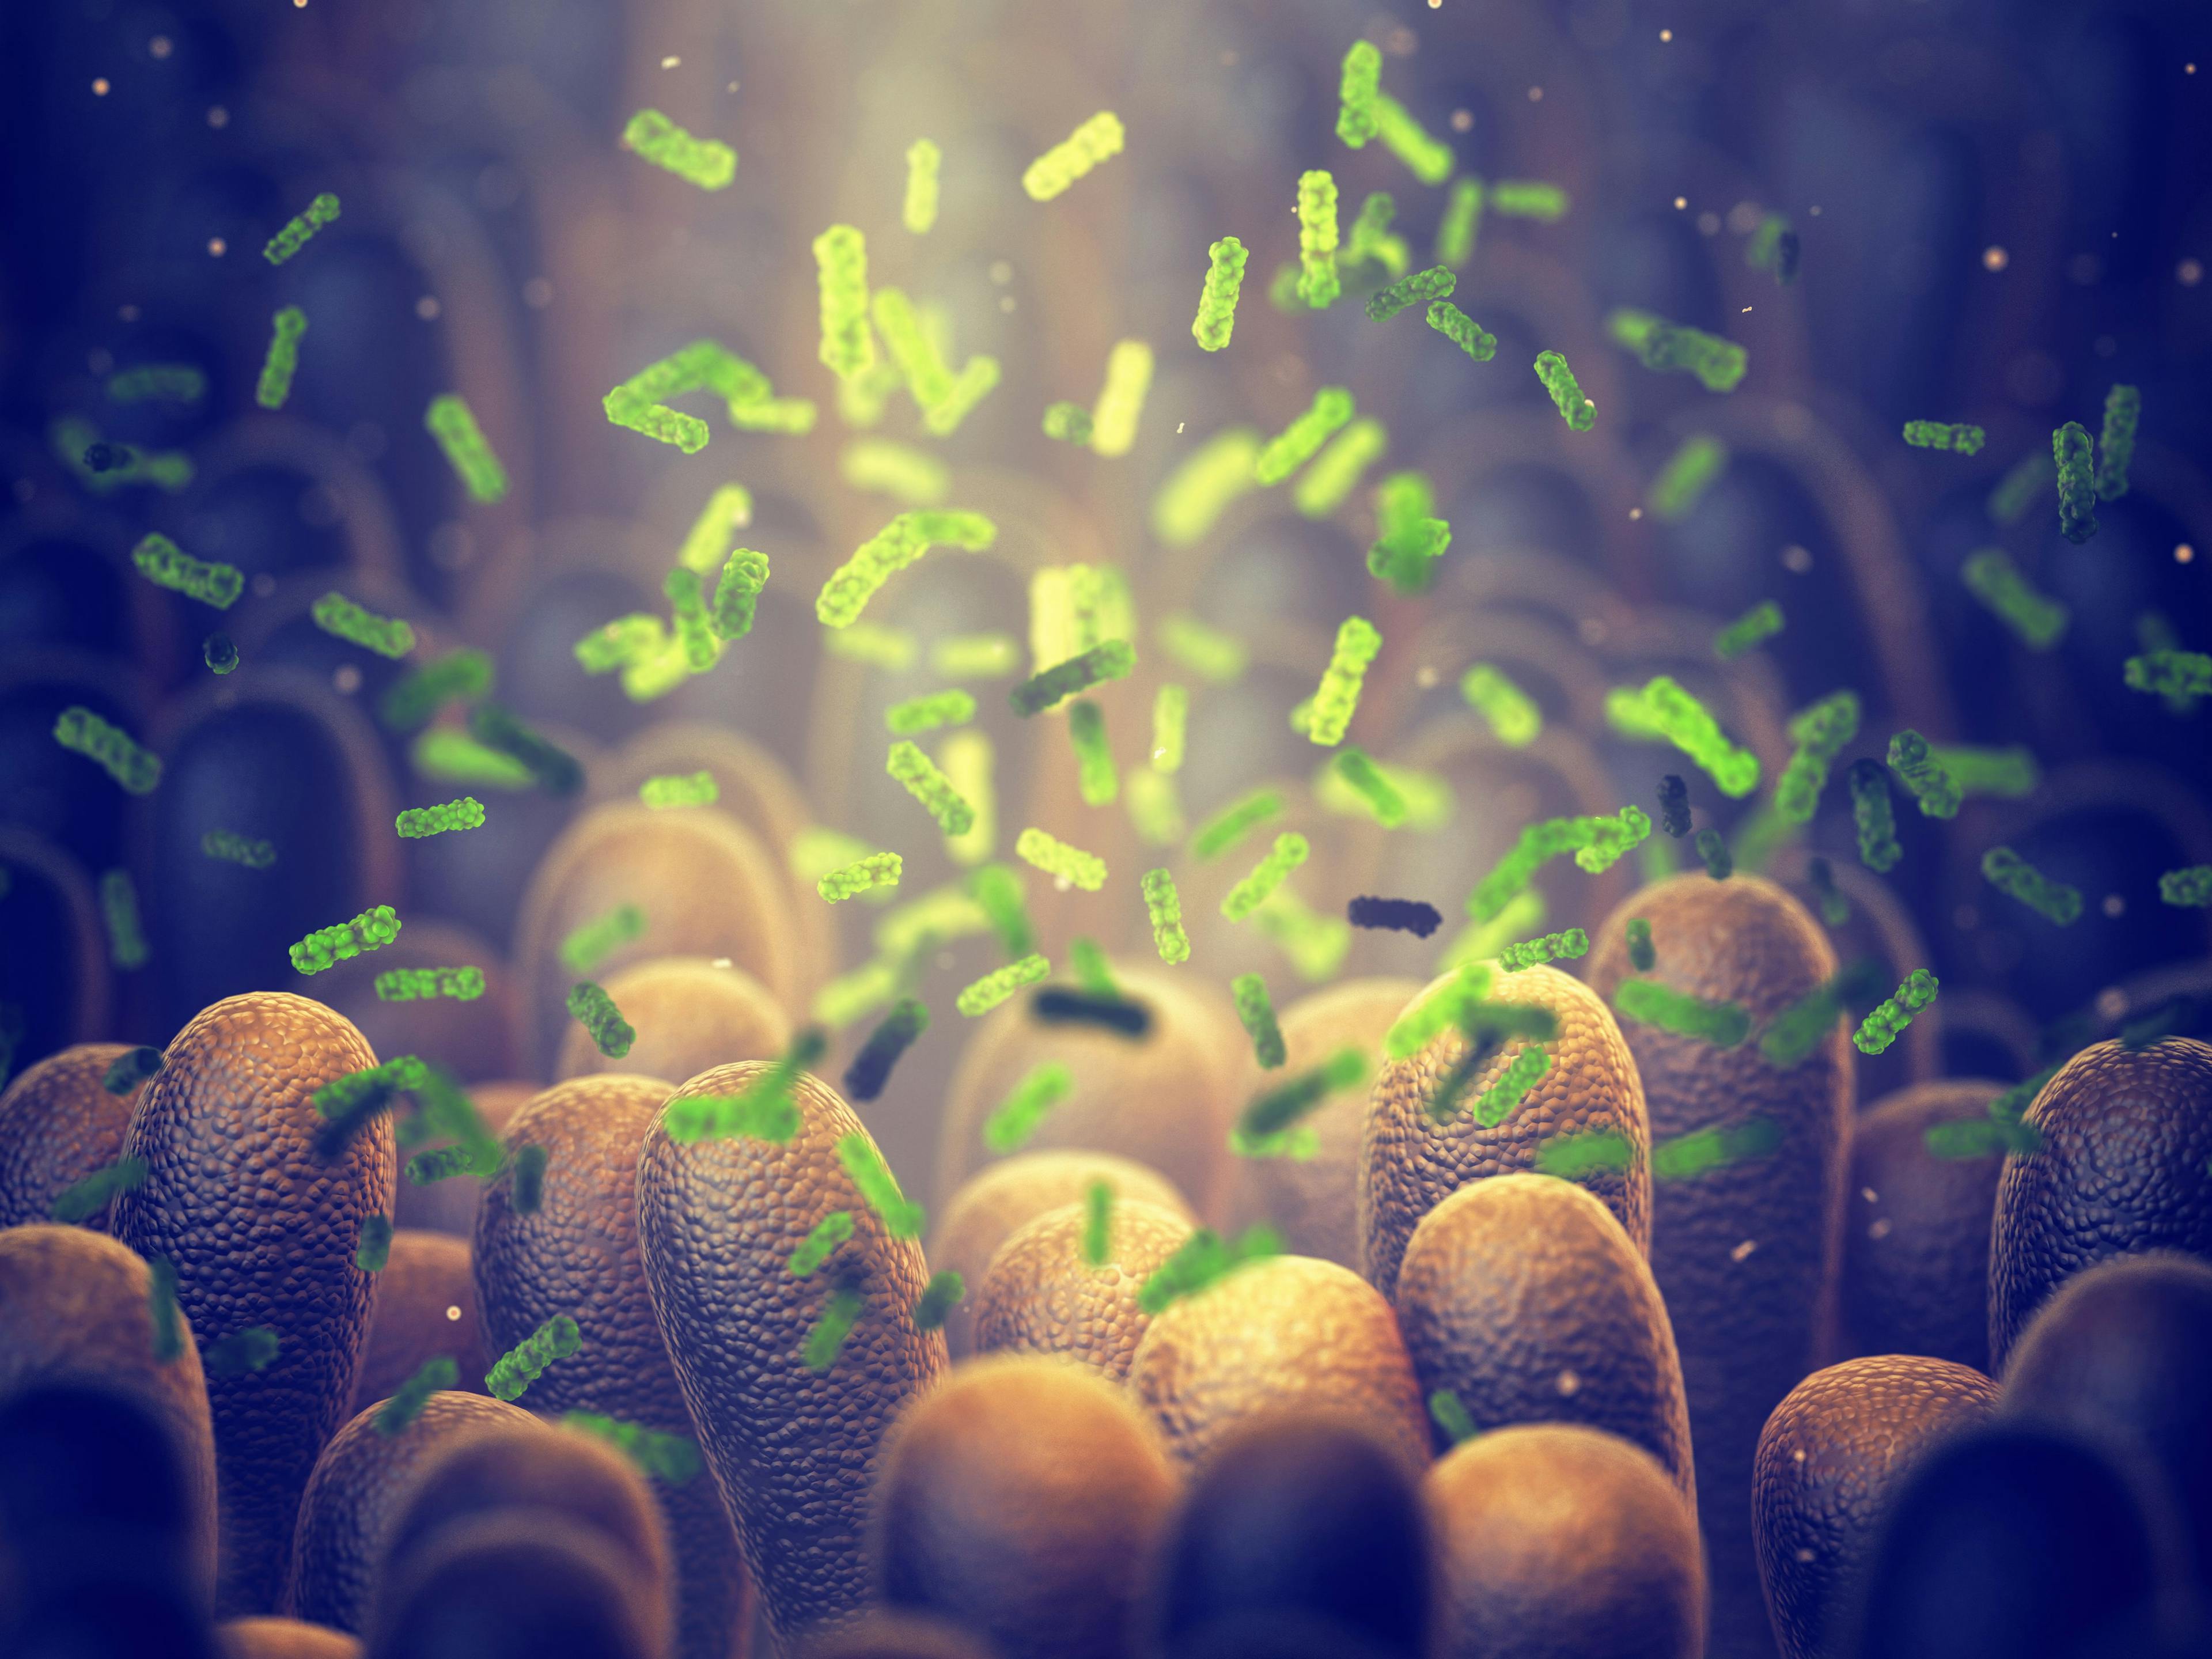 Intestinal bacteria, Gut microbiome helps control intestinal digestion and the immune system, Probiotics are beneficial bacteria used to help the growth of healthy gut flora